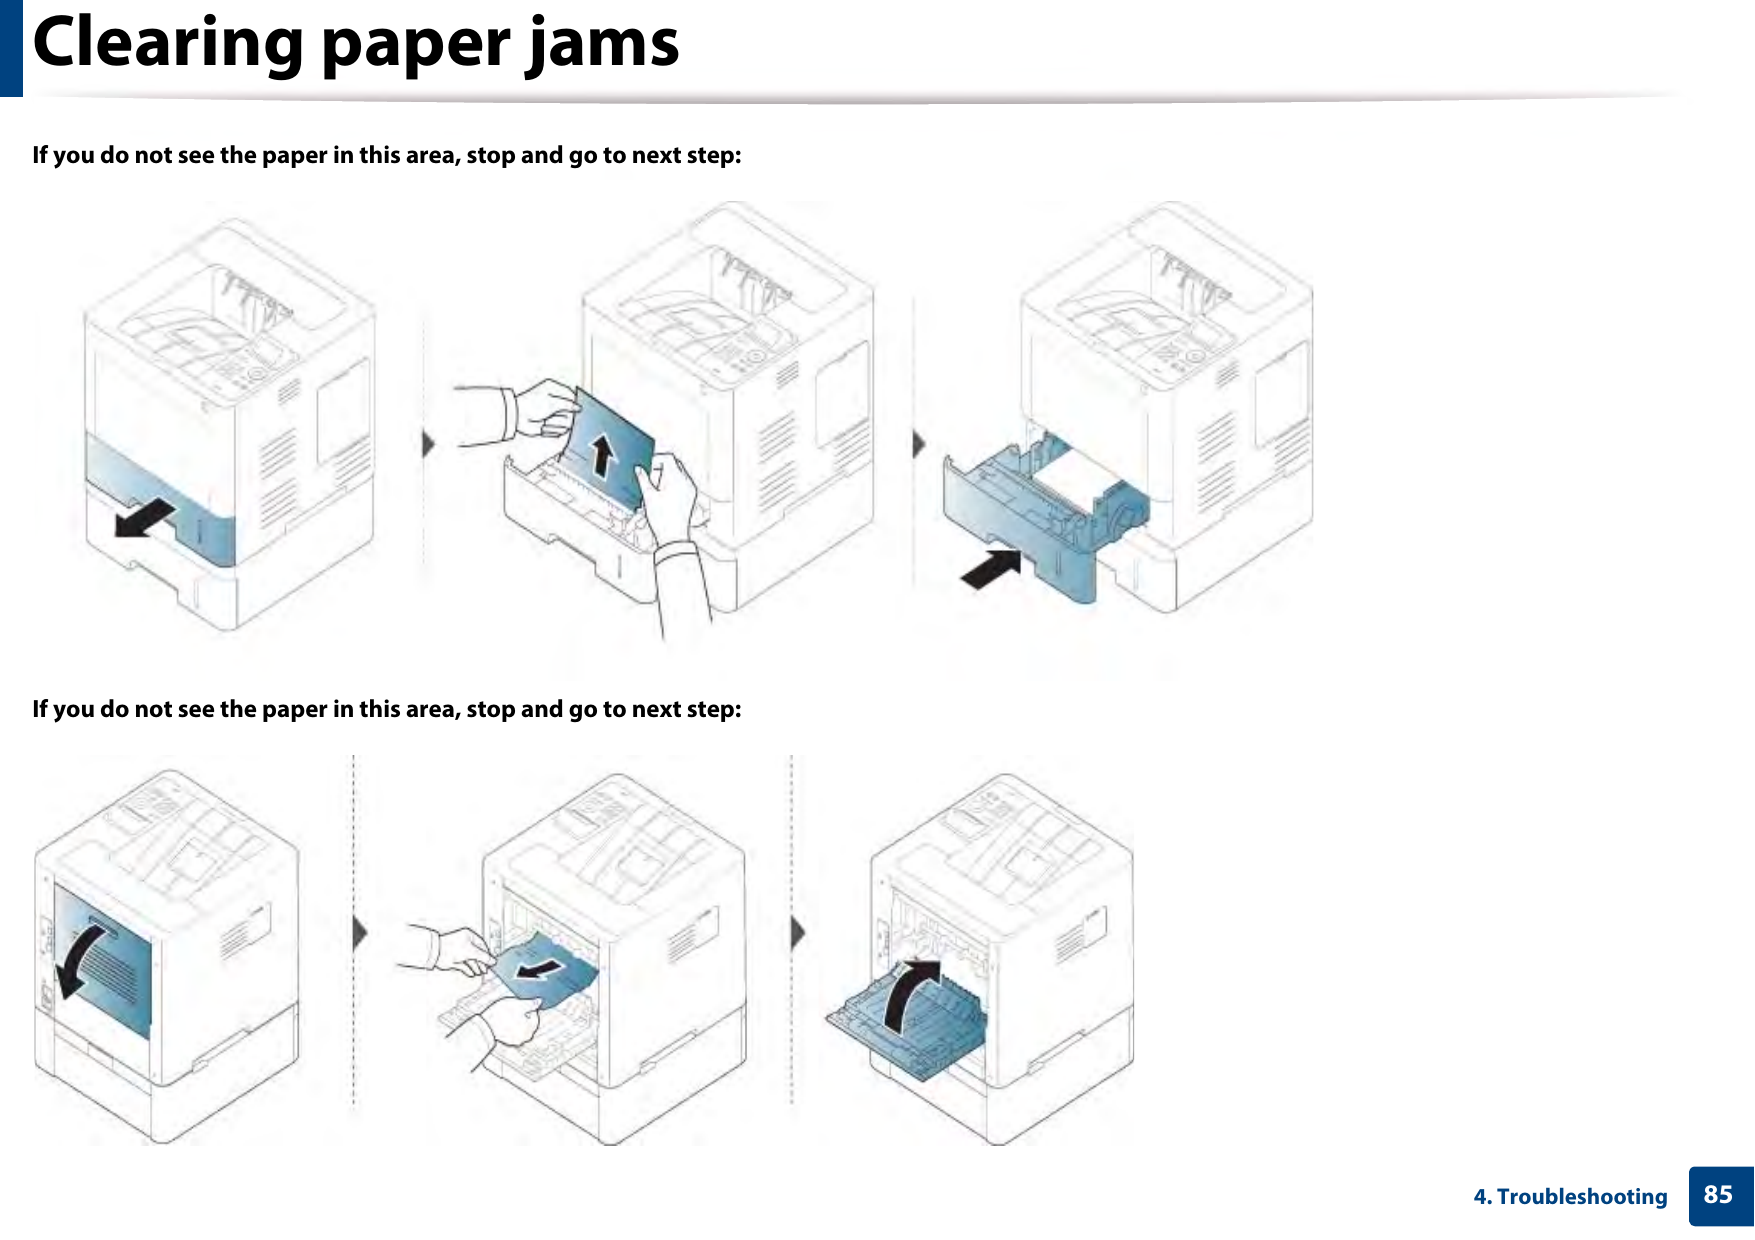 Clearing paper jams854. TroubleshootingIf you do not see the paper in this area, stop and go to next step:If you do not see the paper in this area, stop and go to next step: